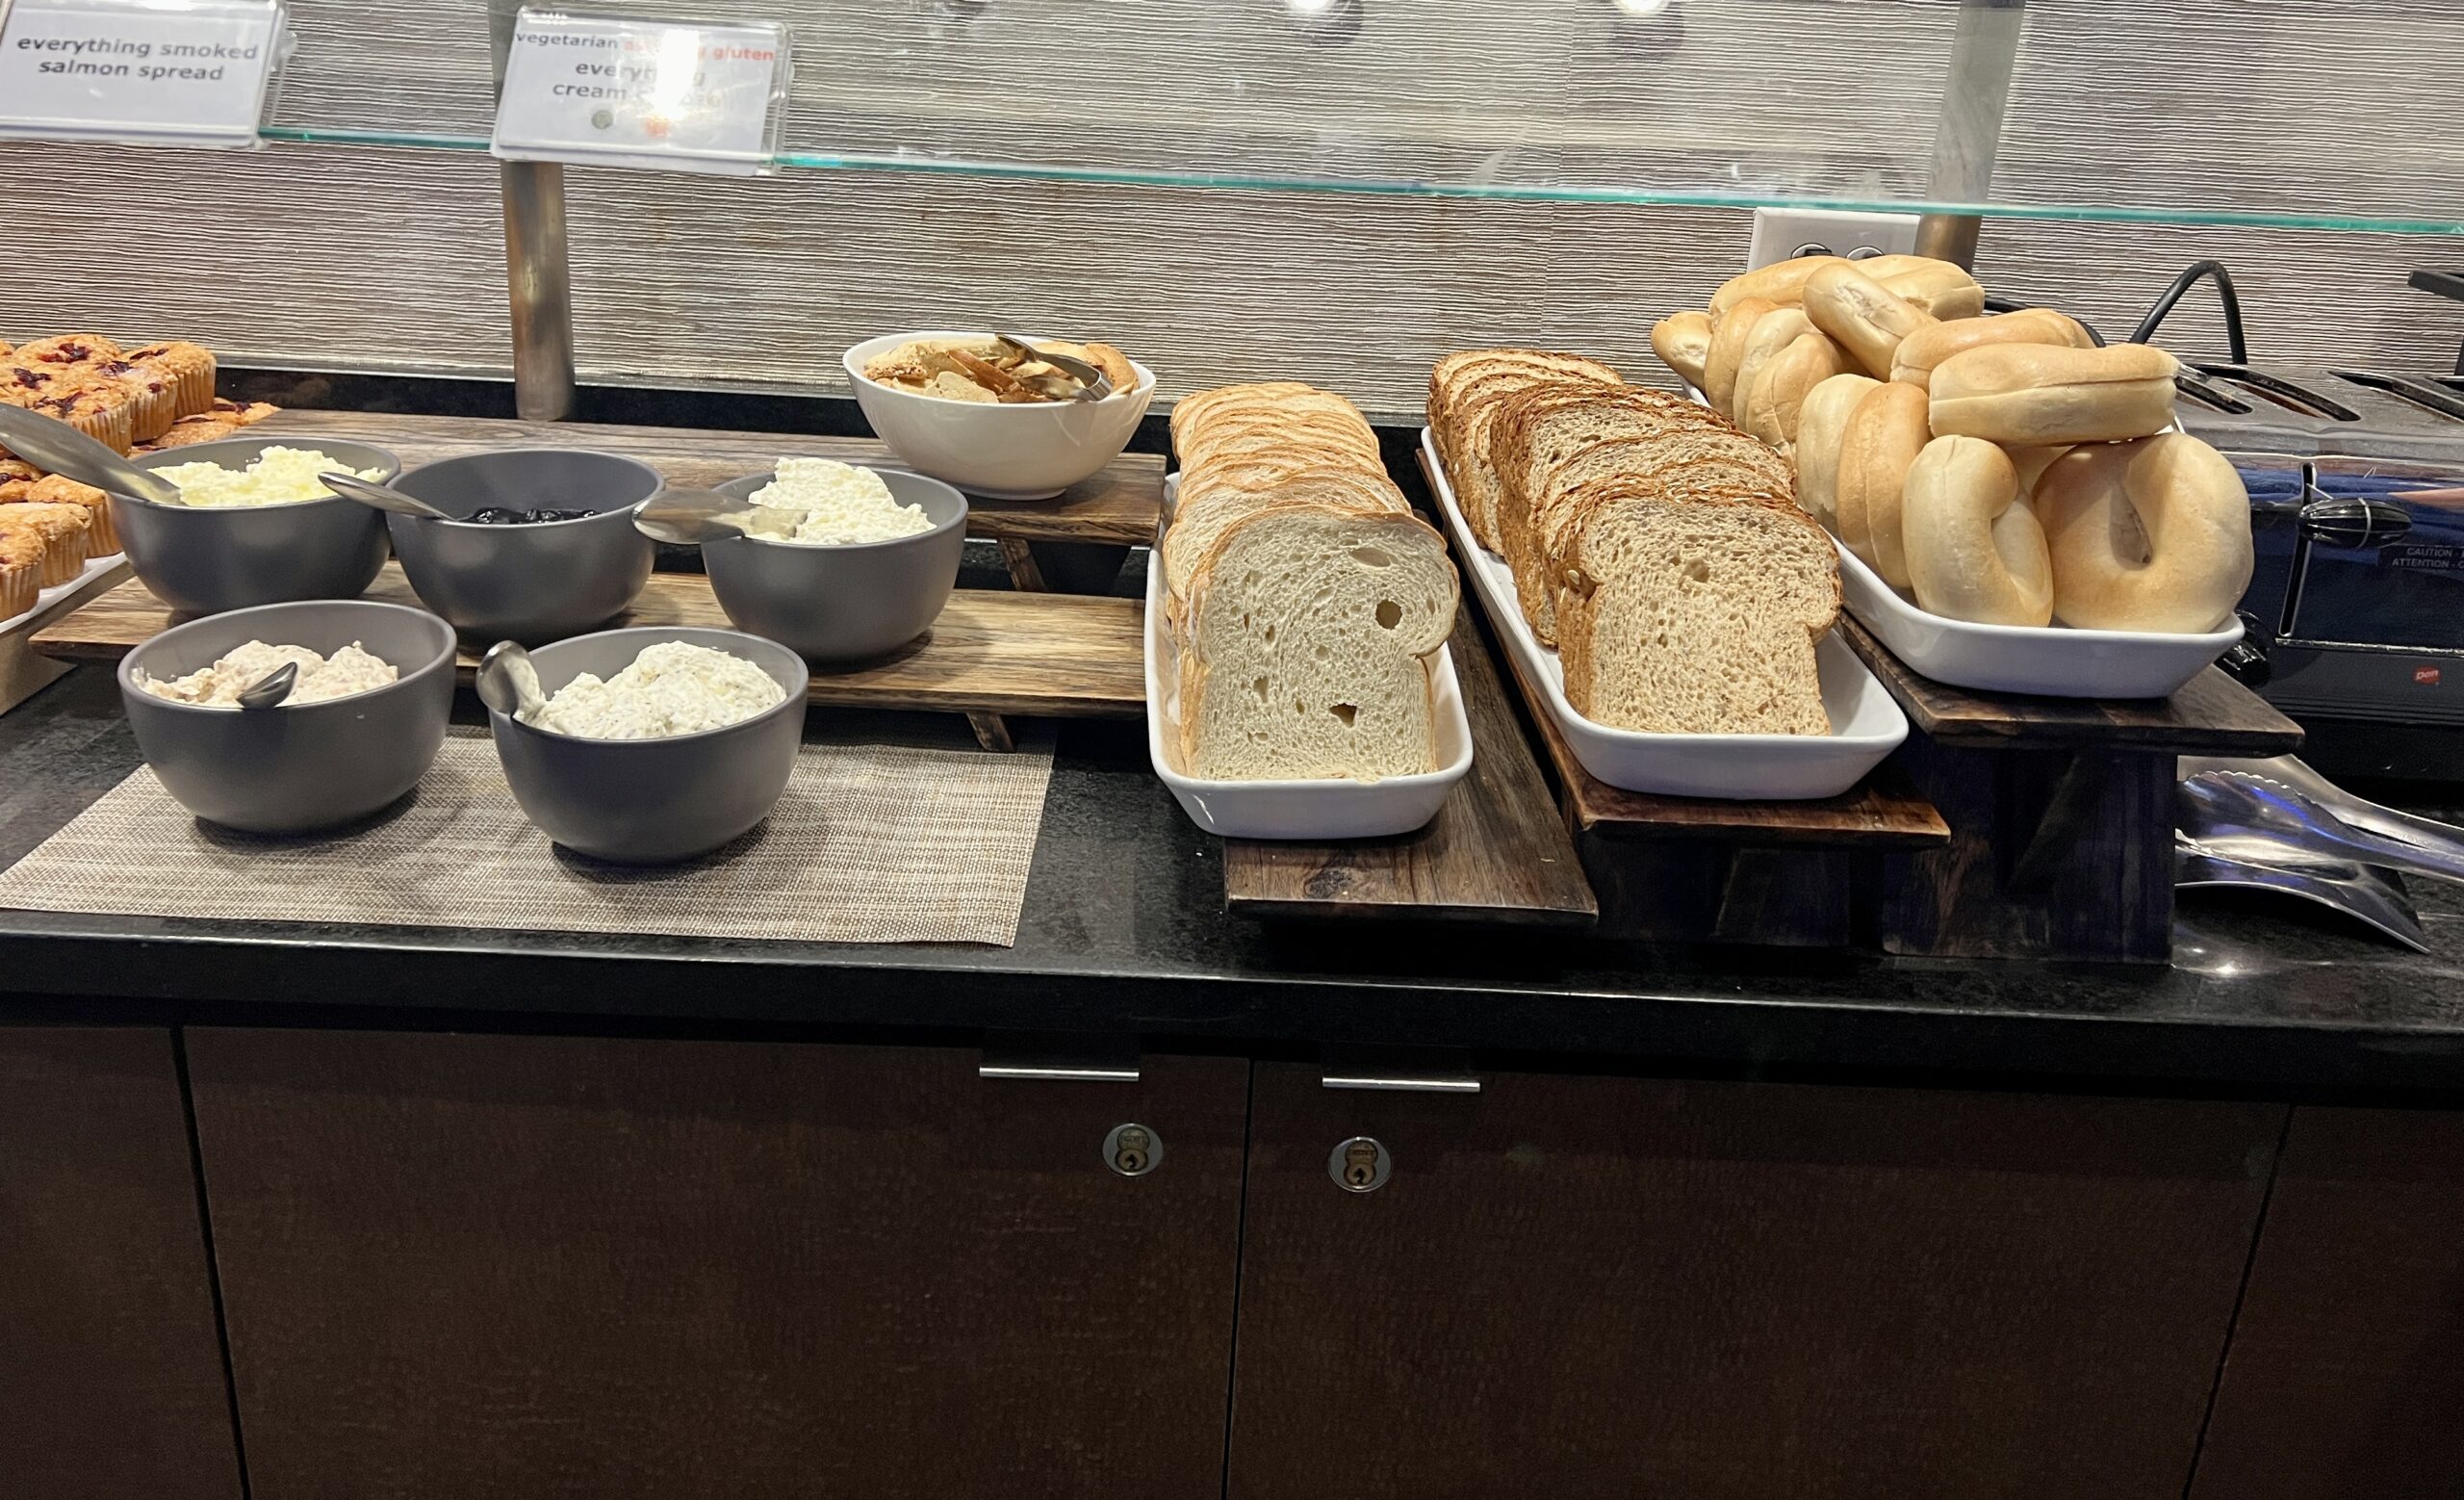 Delta Sky Club ATL A17 Breads Spreads Bagels